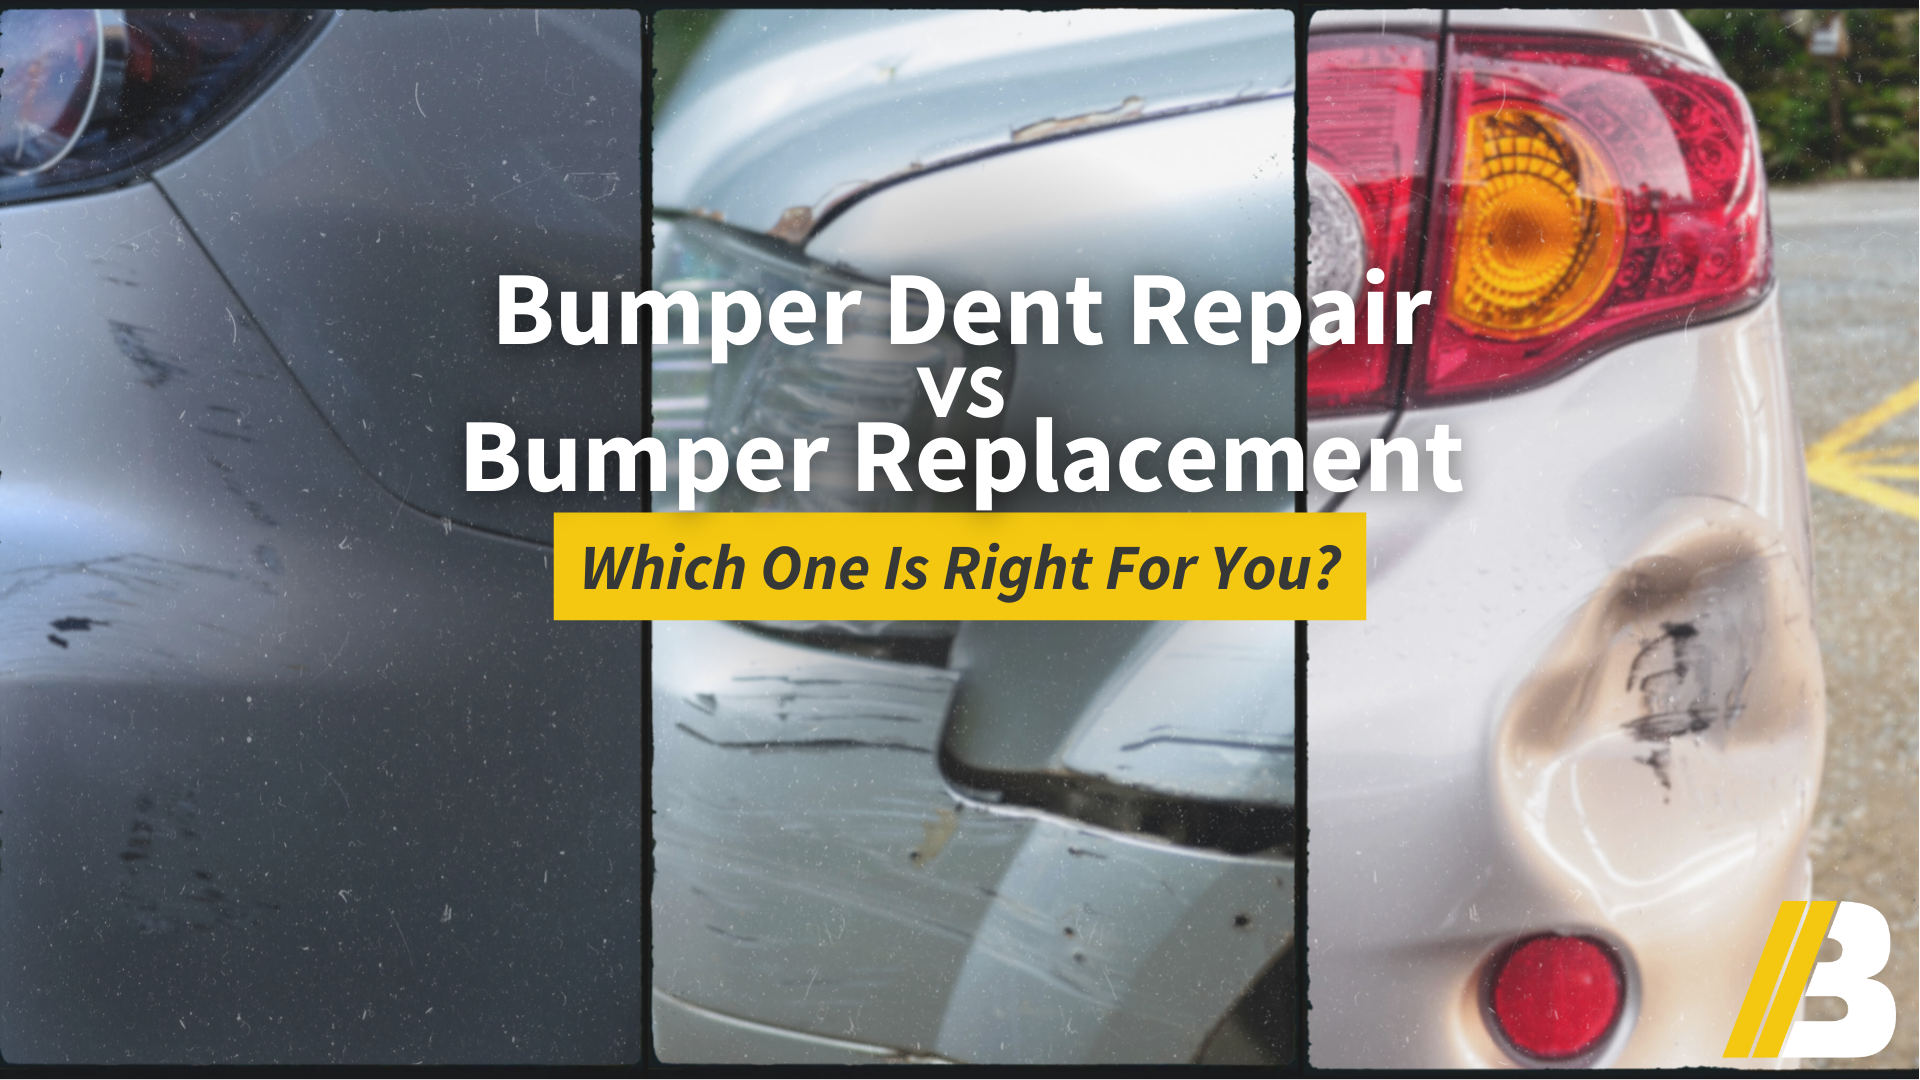 Bumper Dent Repair VS Bumper Replacement With Bumpers That Deliver